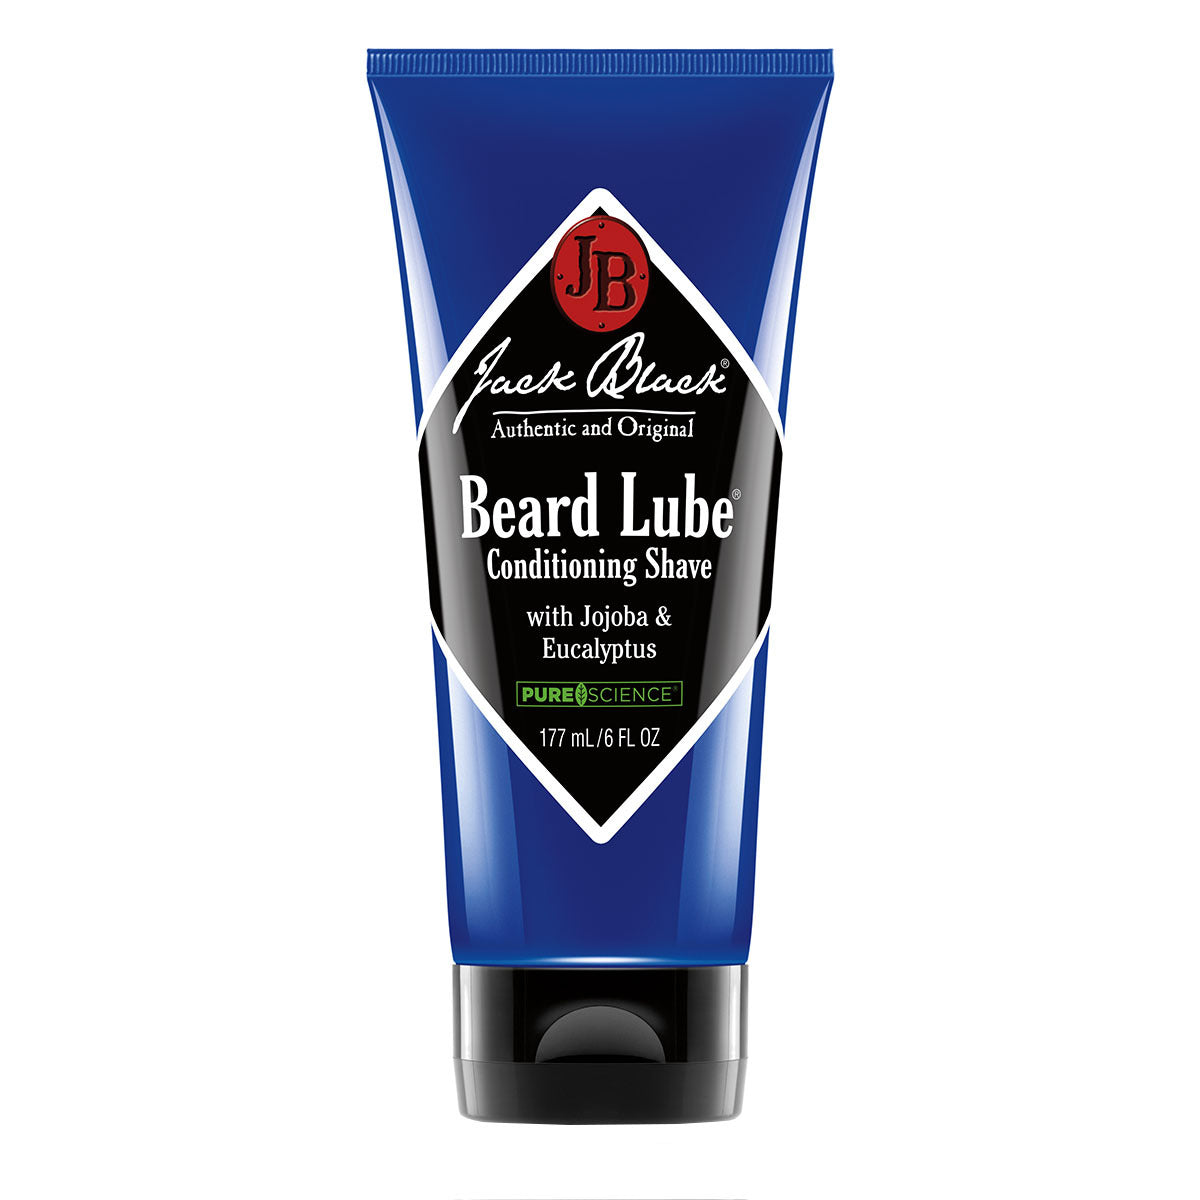 Primary image of Beard Lube Conditioning Shave